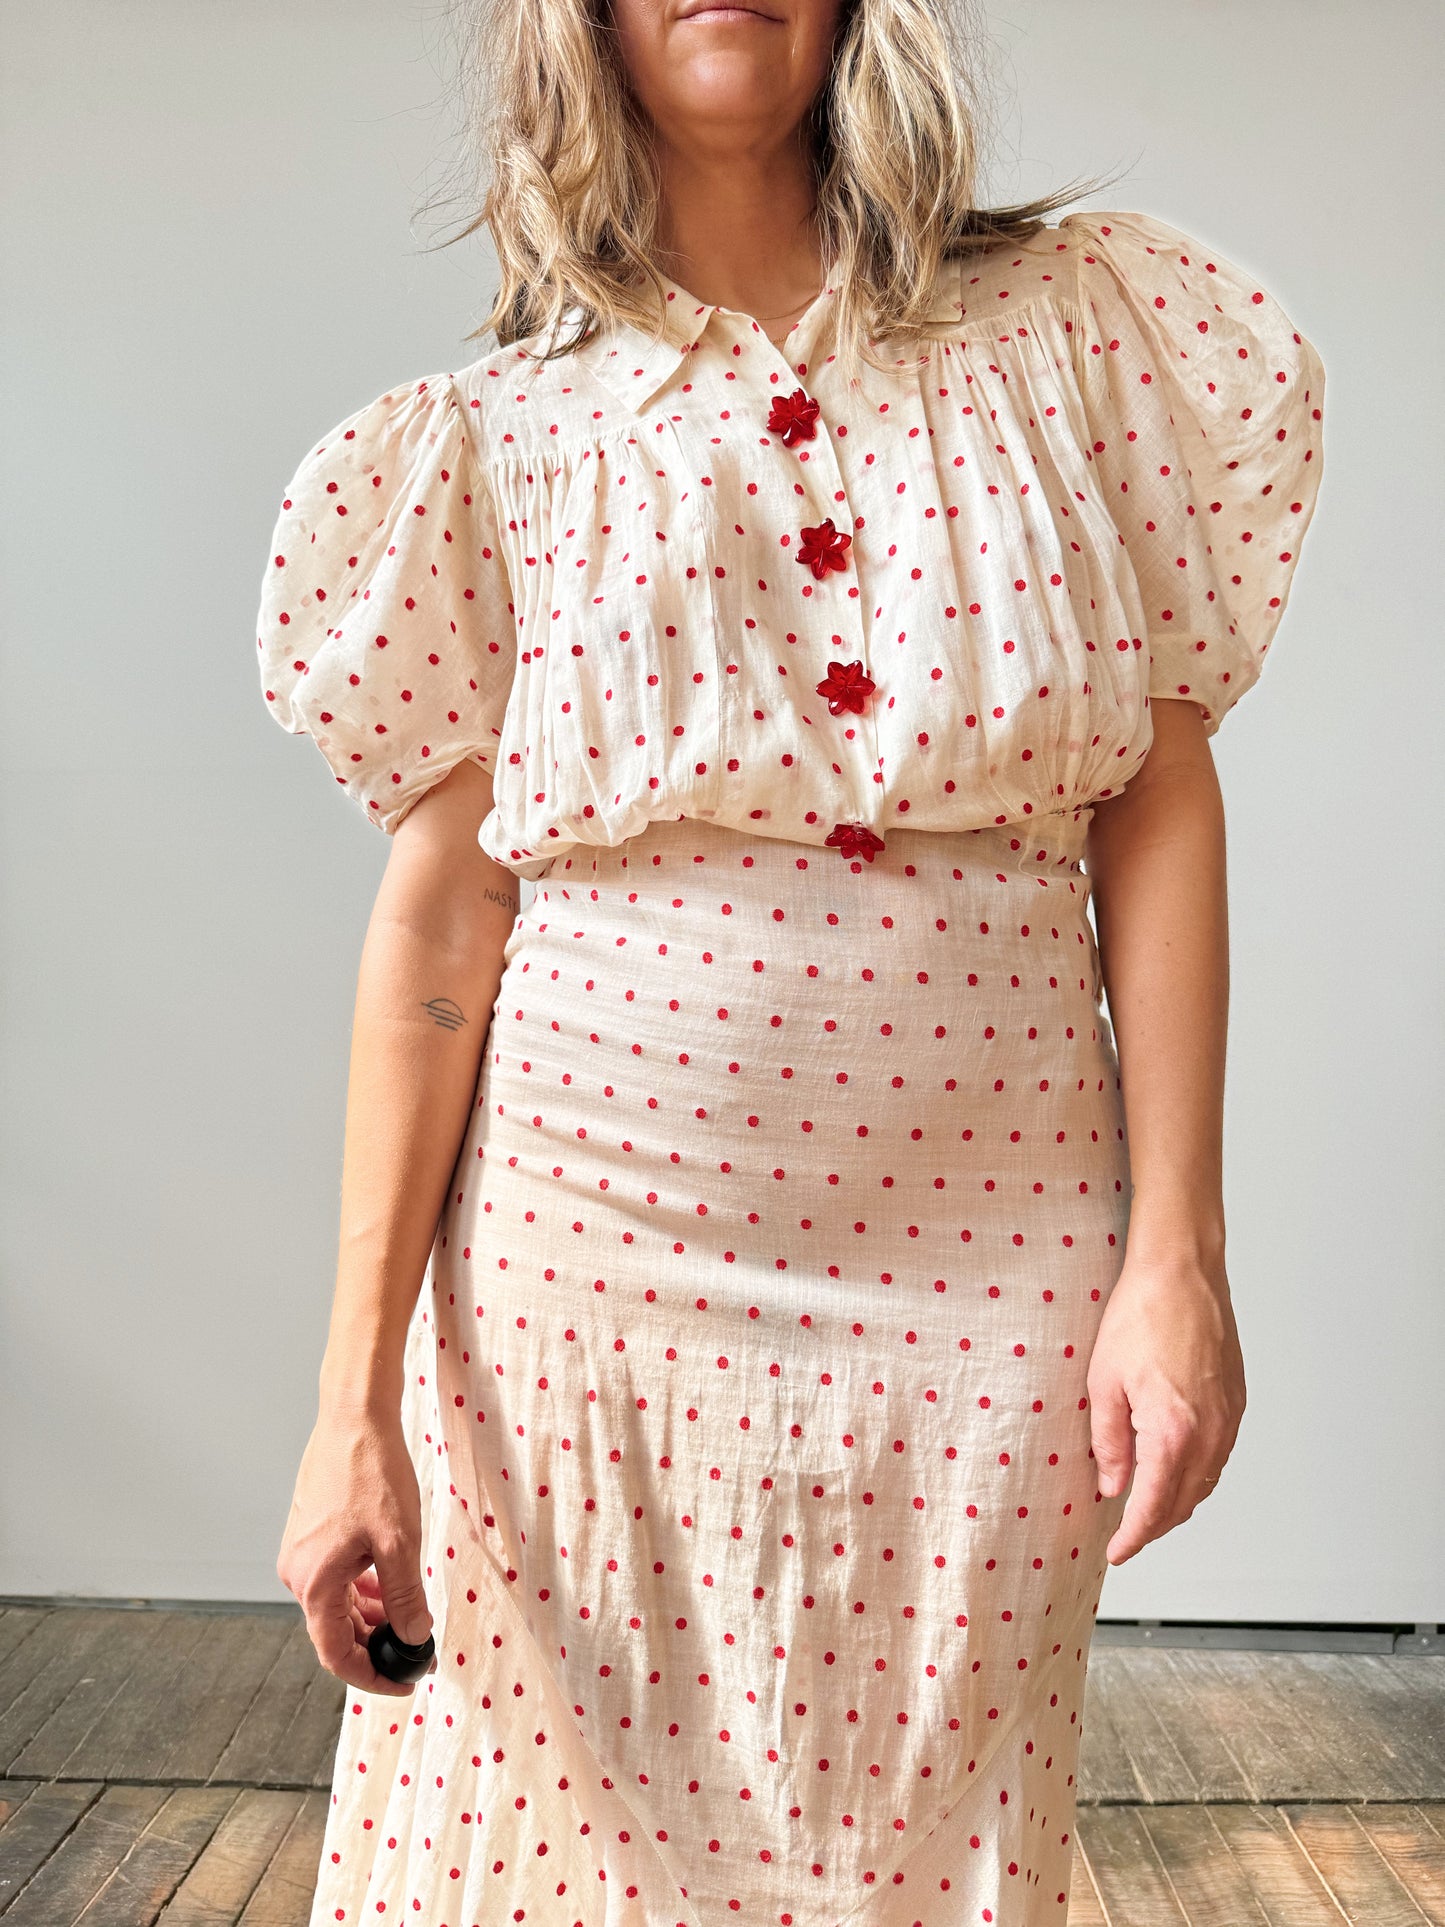 Early 1900s Cotton Voile Polka Dot Dress (S)